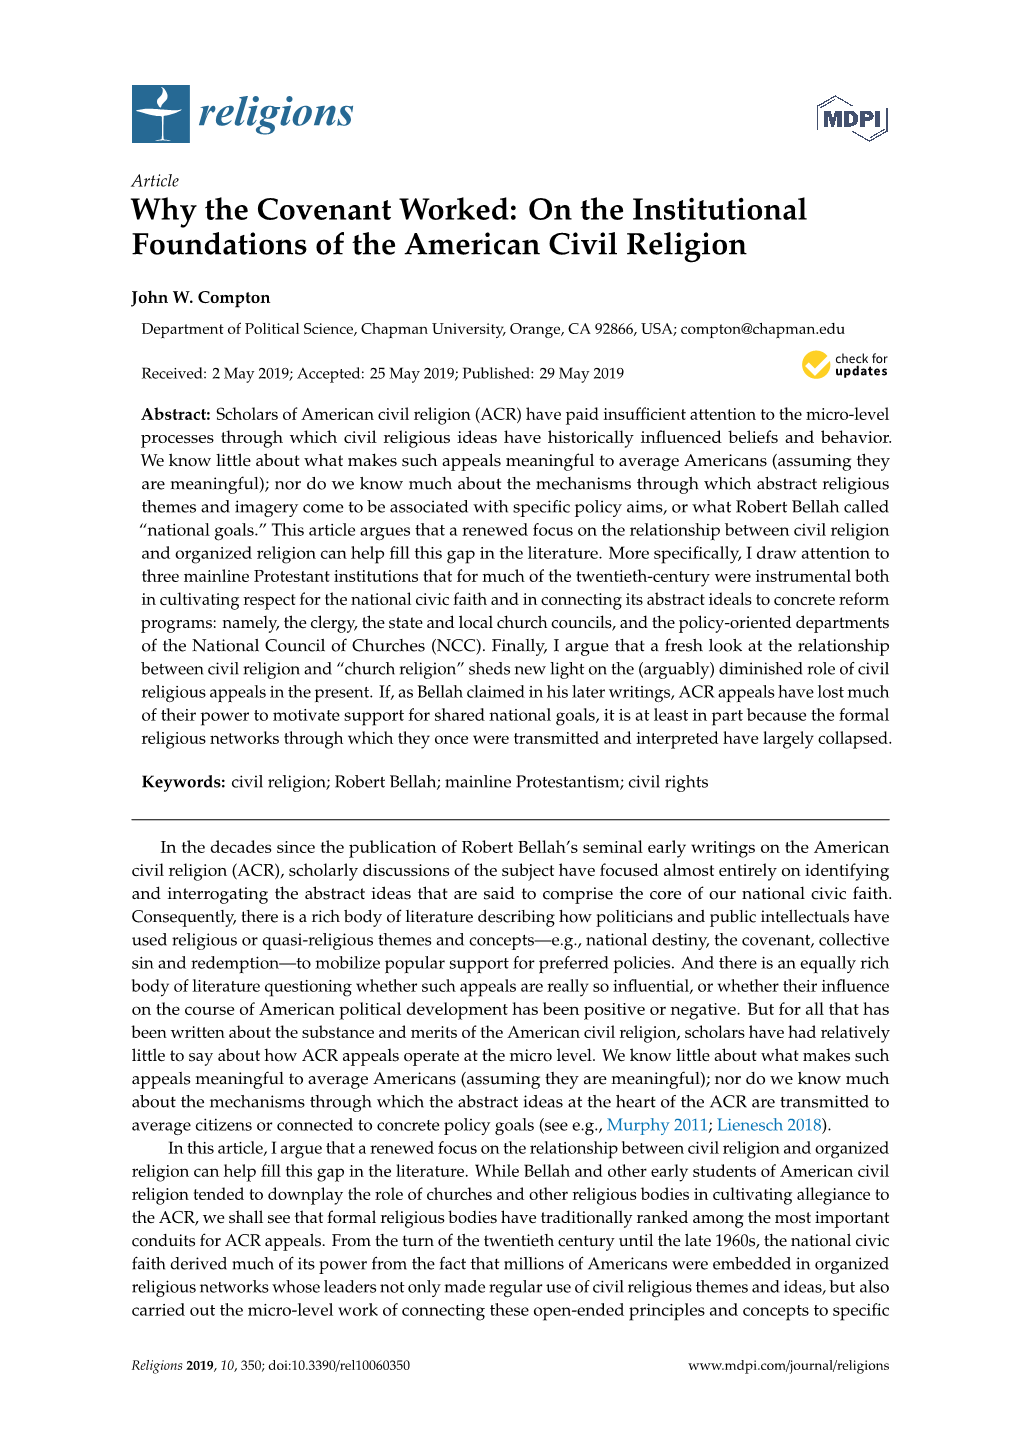 On the Institutional Foundations of the American Civil Religion